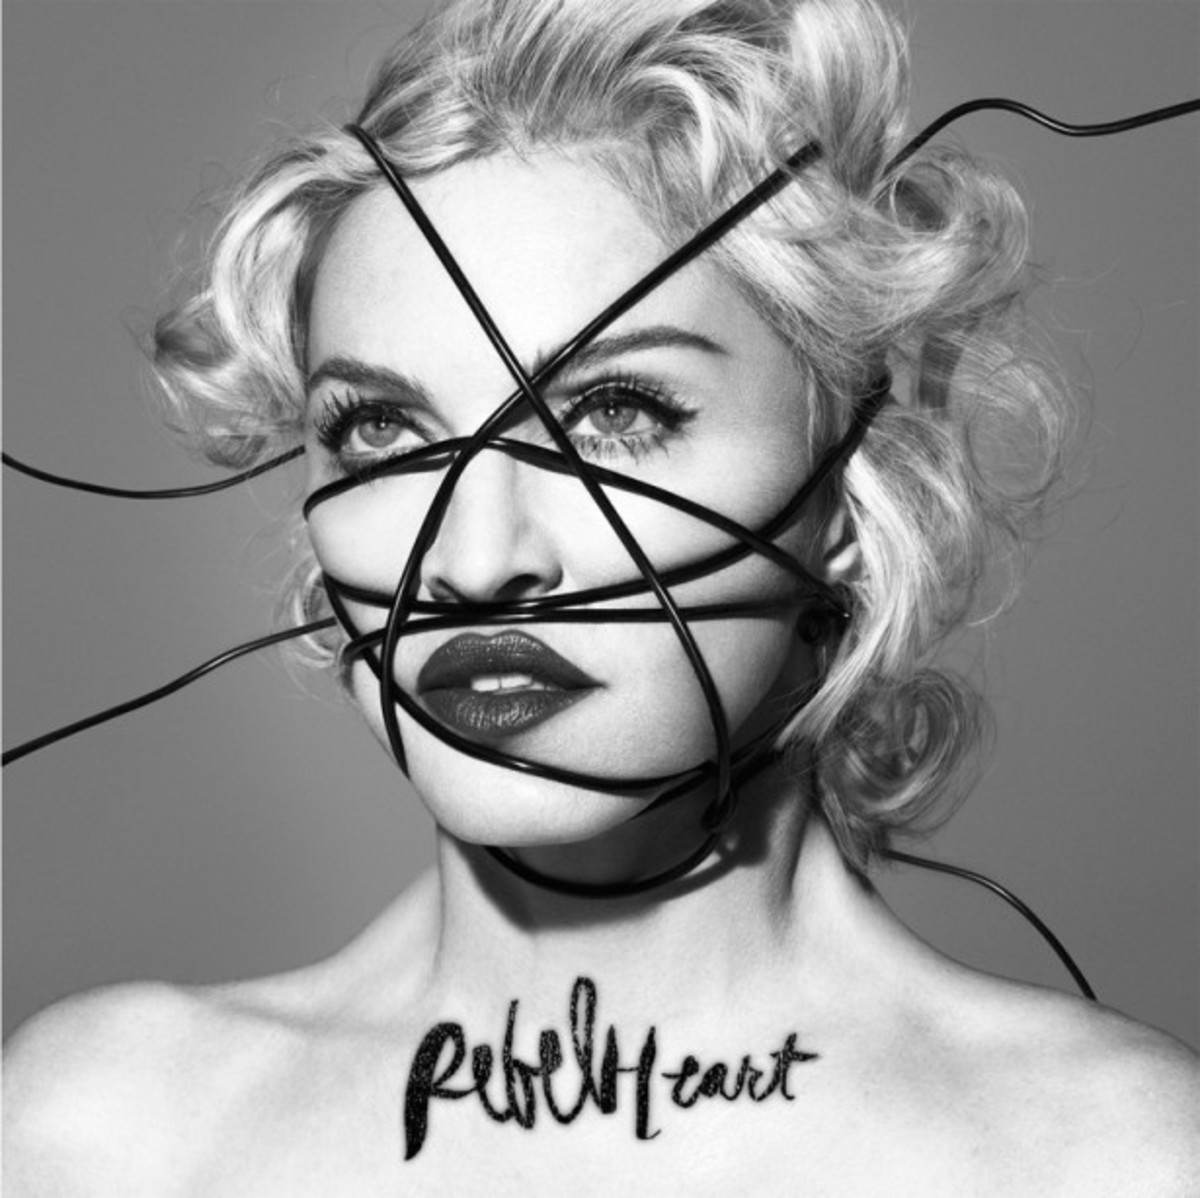 Madonna Releases New Tracks With Diplo and Kanye West